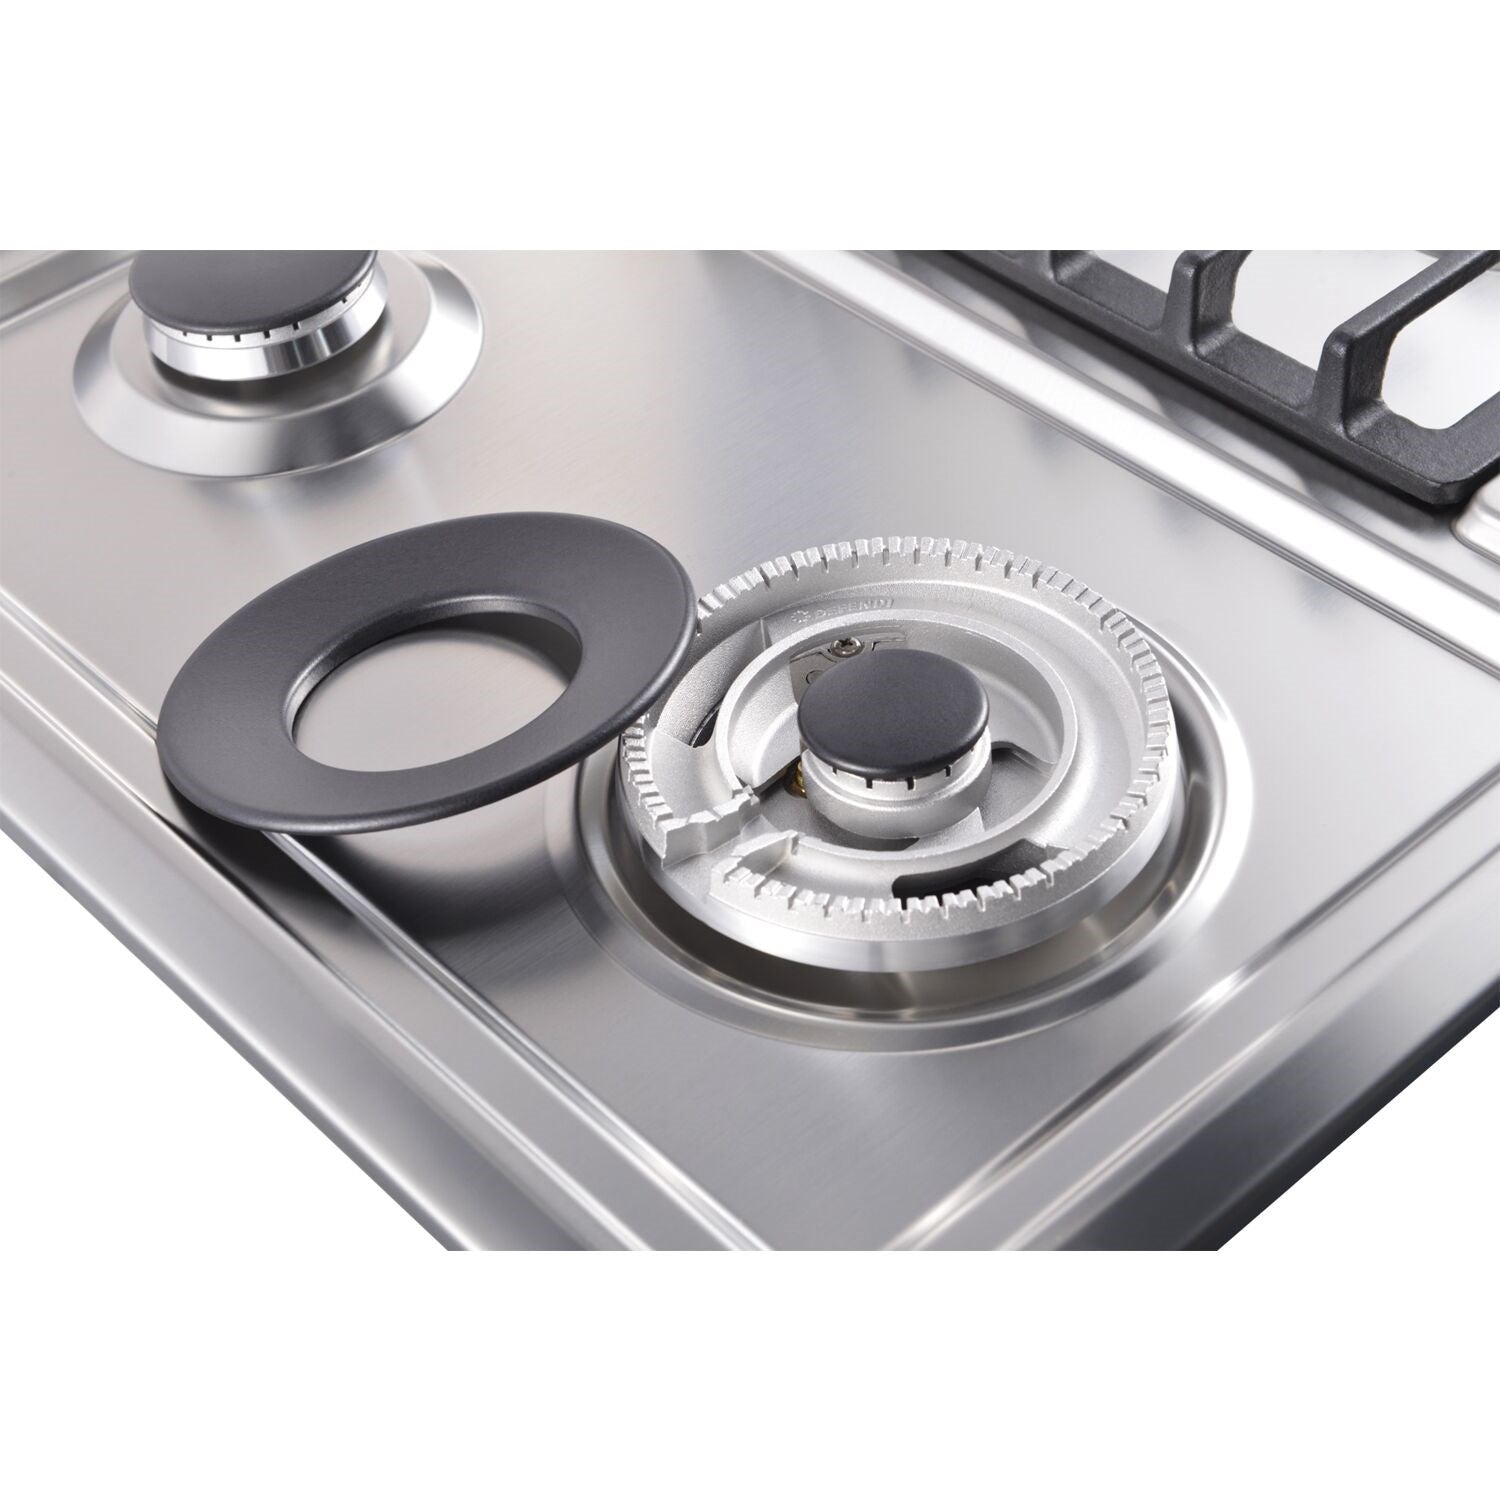 GALANZ - 24 in. Gas Cooktop in Stainless Steel with 4 Burners including Triple Ring Power Burner and Simmer Burner | GL1CT24AS4G